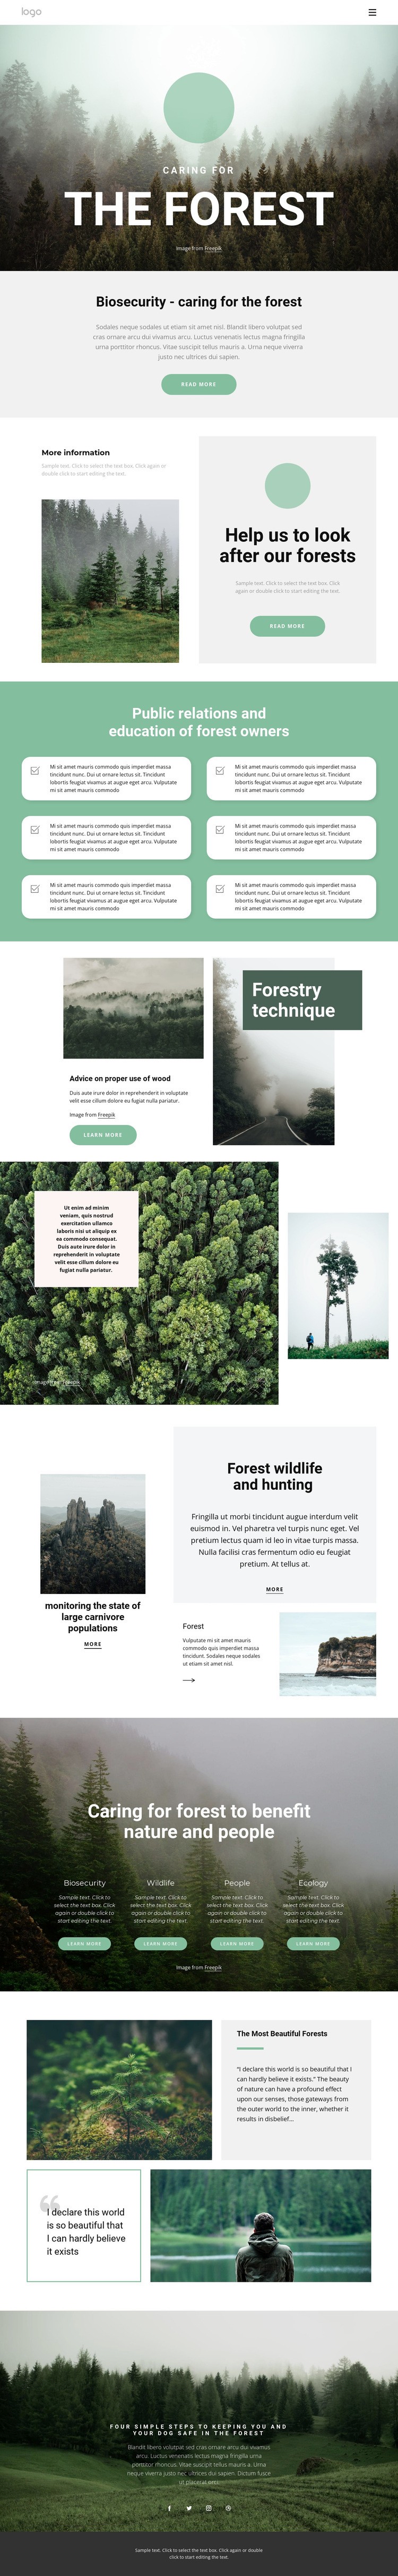 Caring for parks and forests Webflow Template Alternative